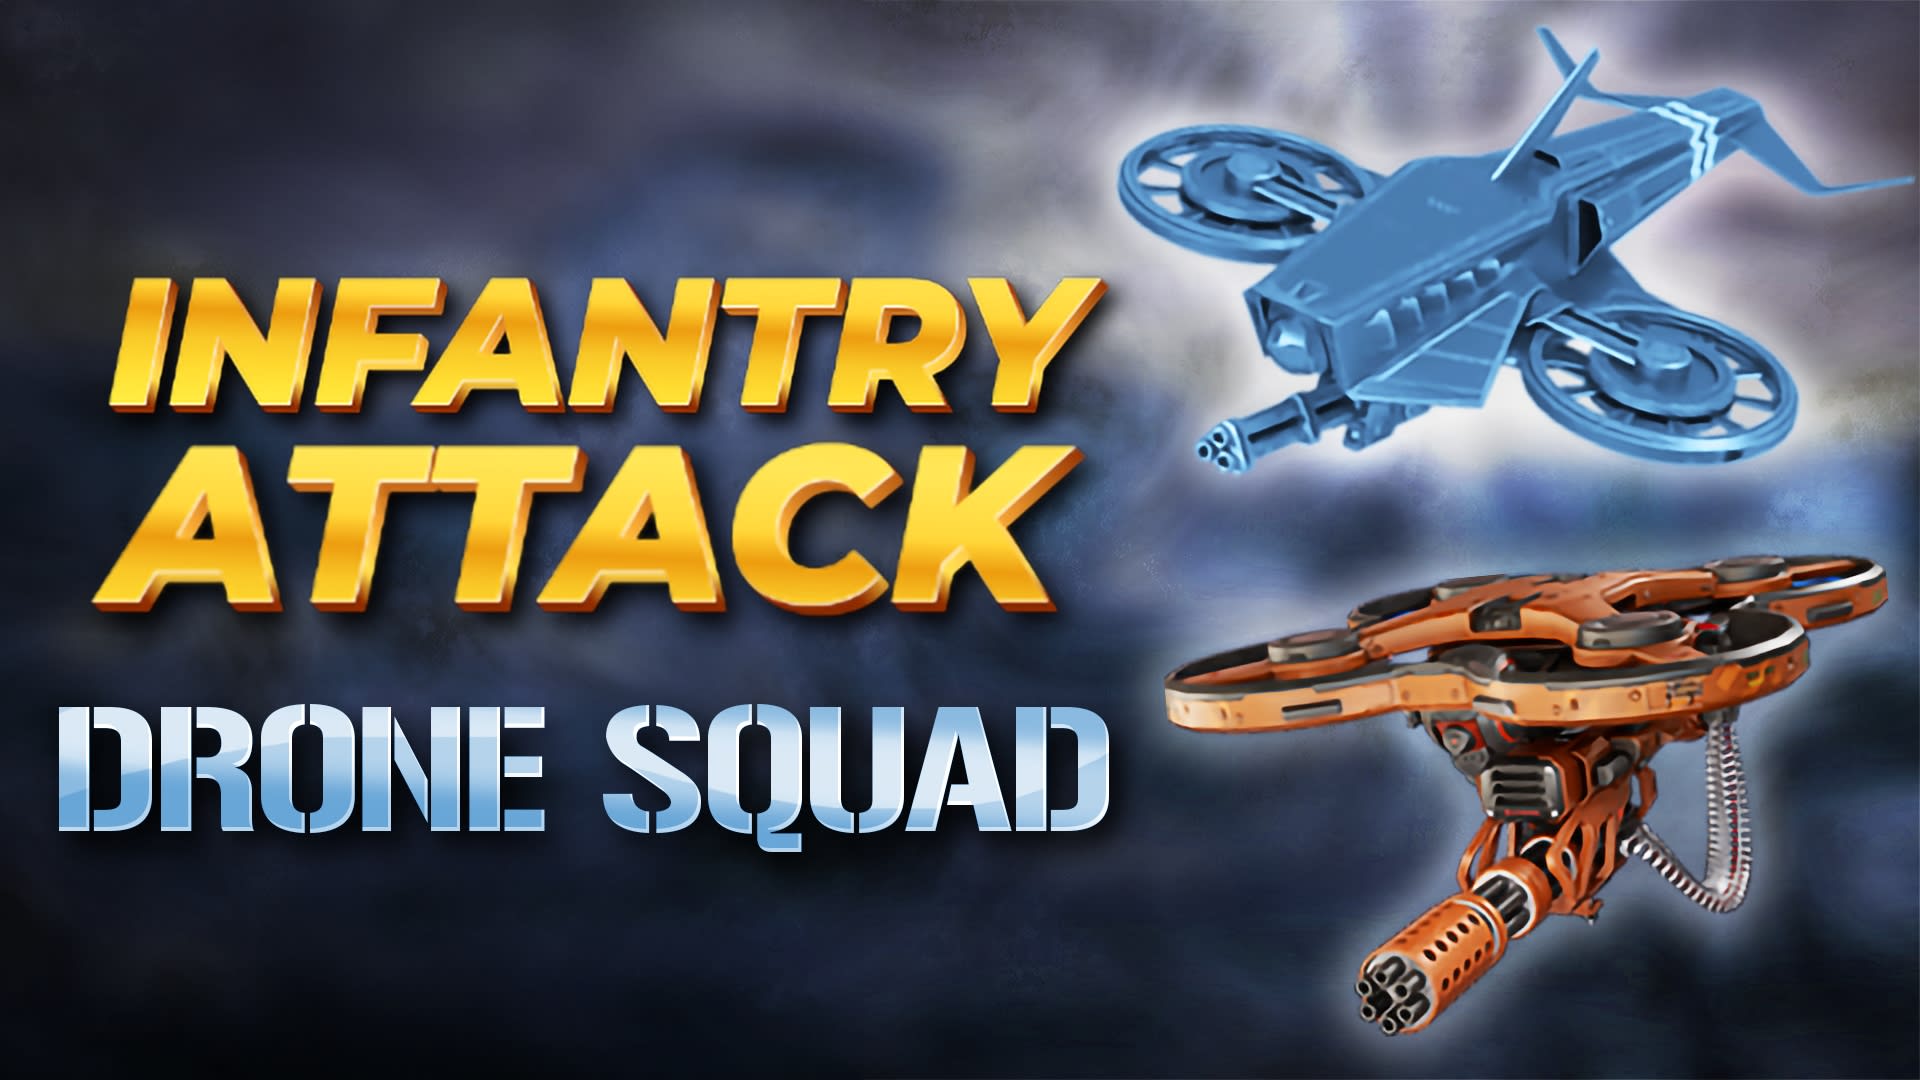 Infantry Attack: Drone Squad